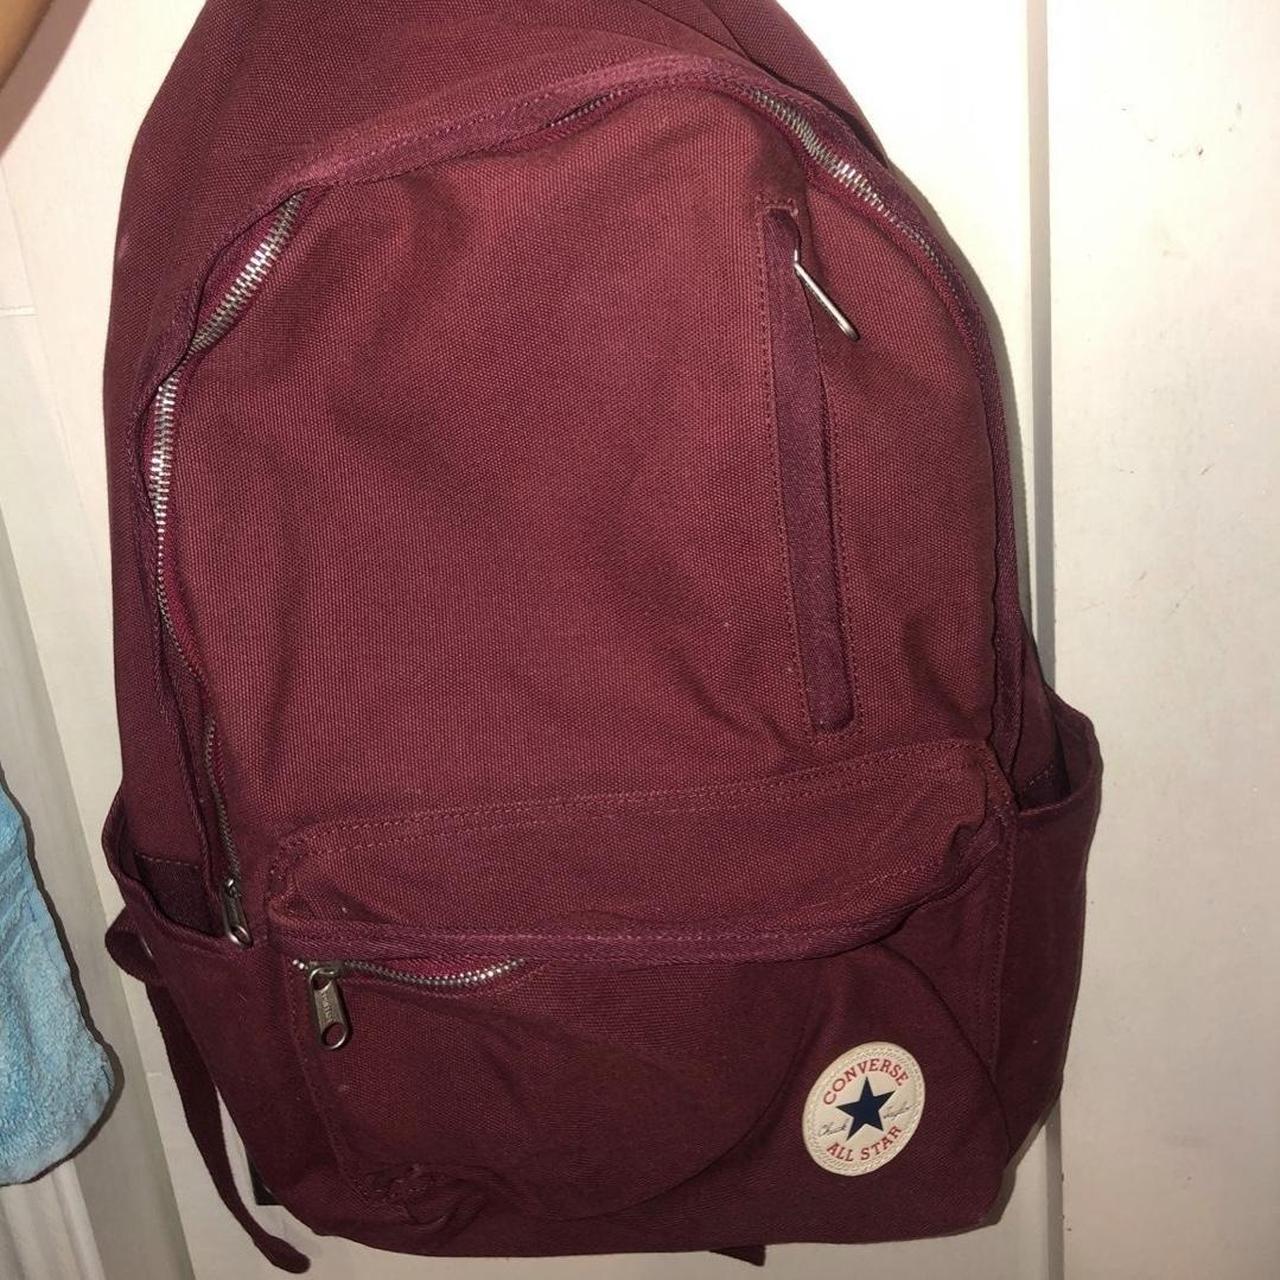 Converse Women's Burgundy and Red Bag | Depop